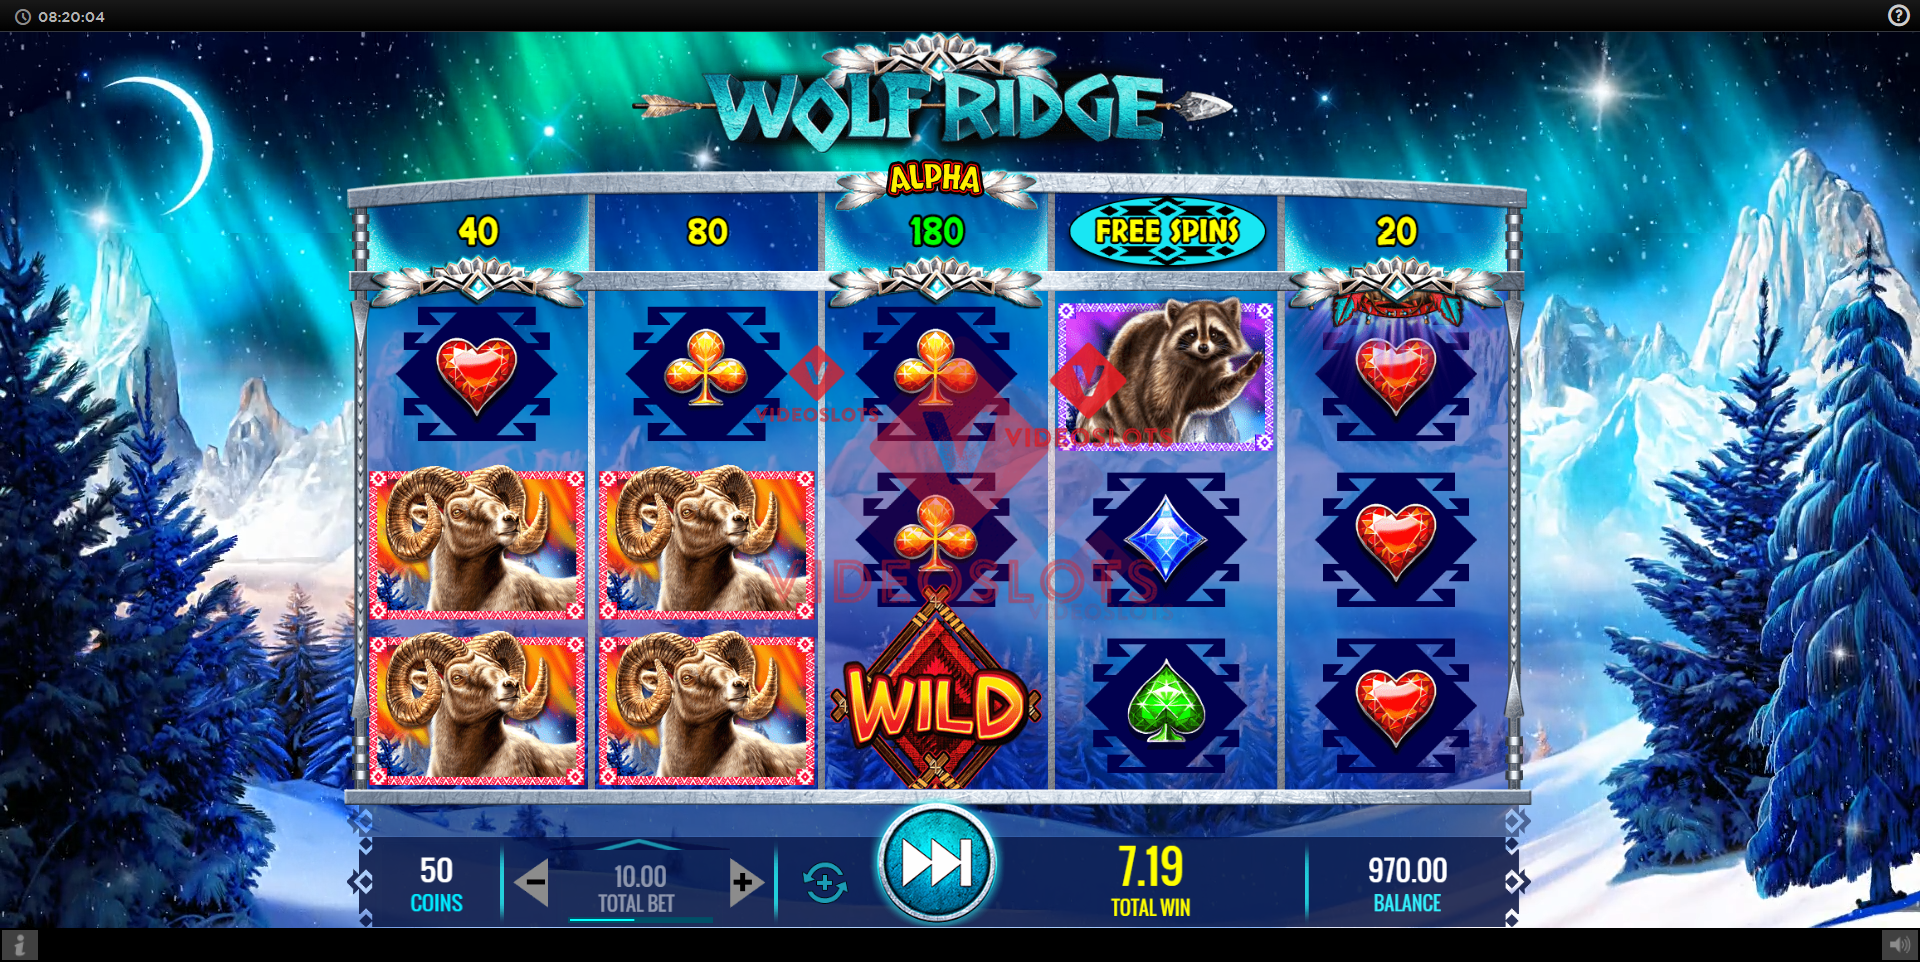 Base Game for Wolf Ridge slot from IGT